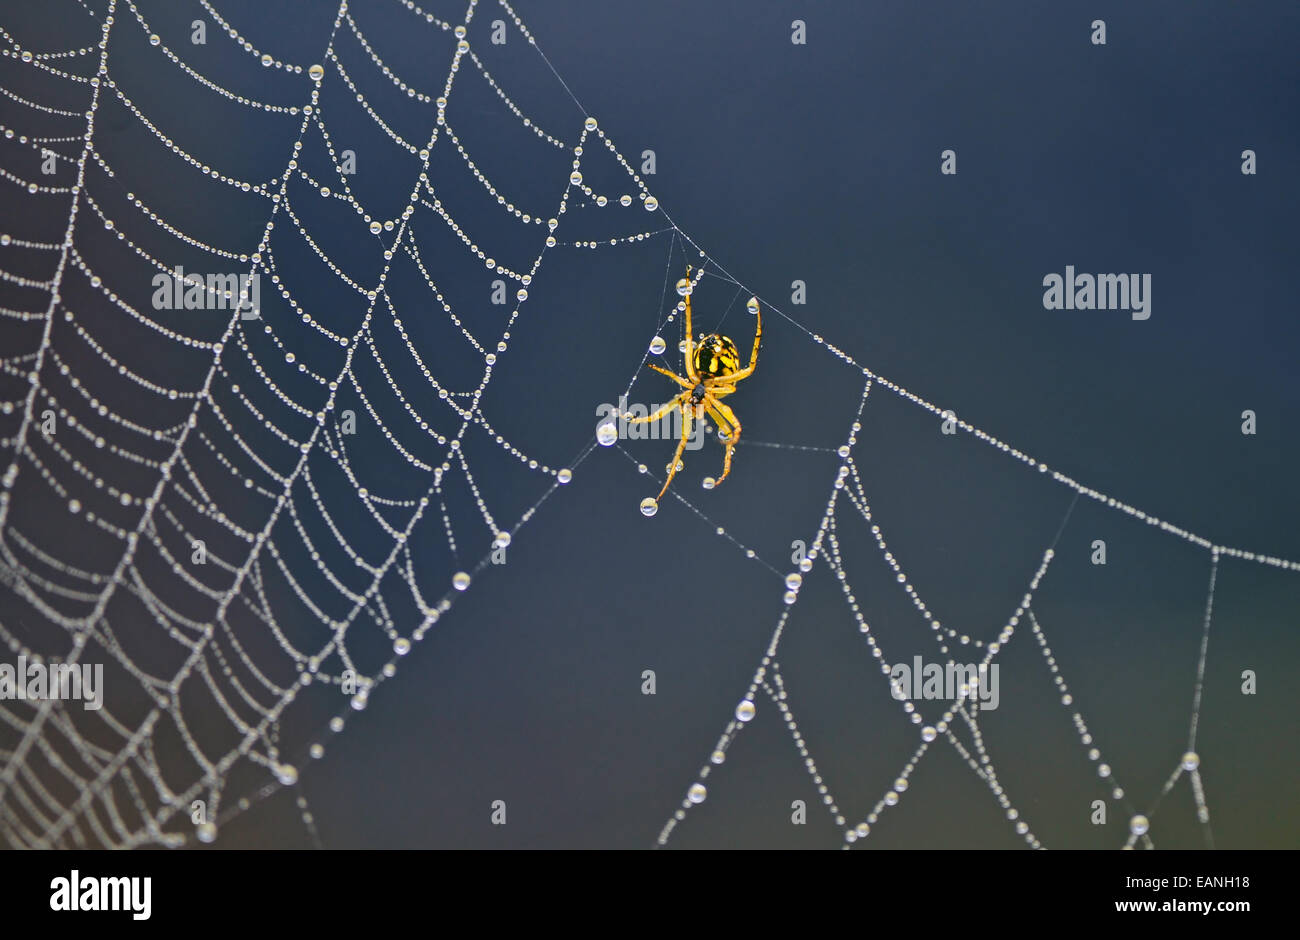 Yellow spider on spiderweb with blue background Stock Photo